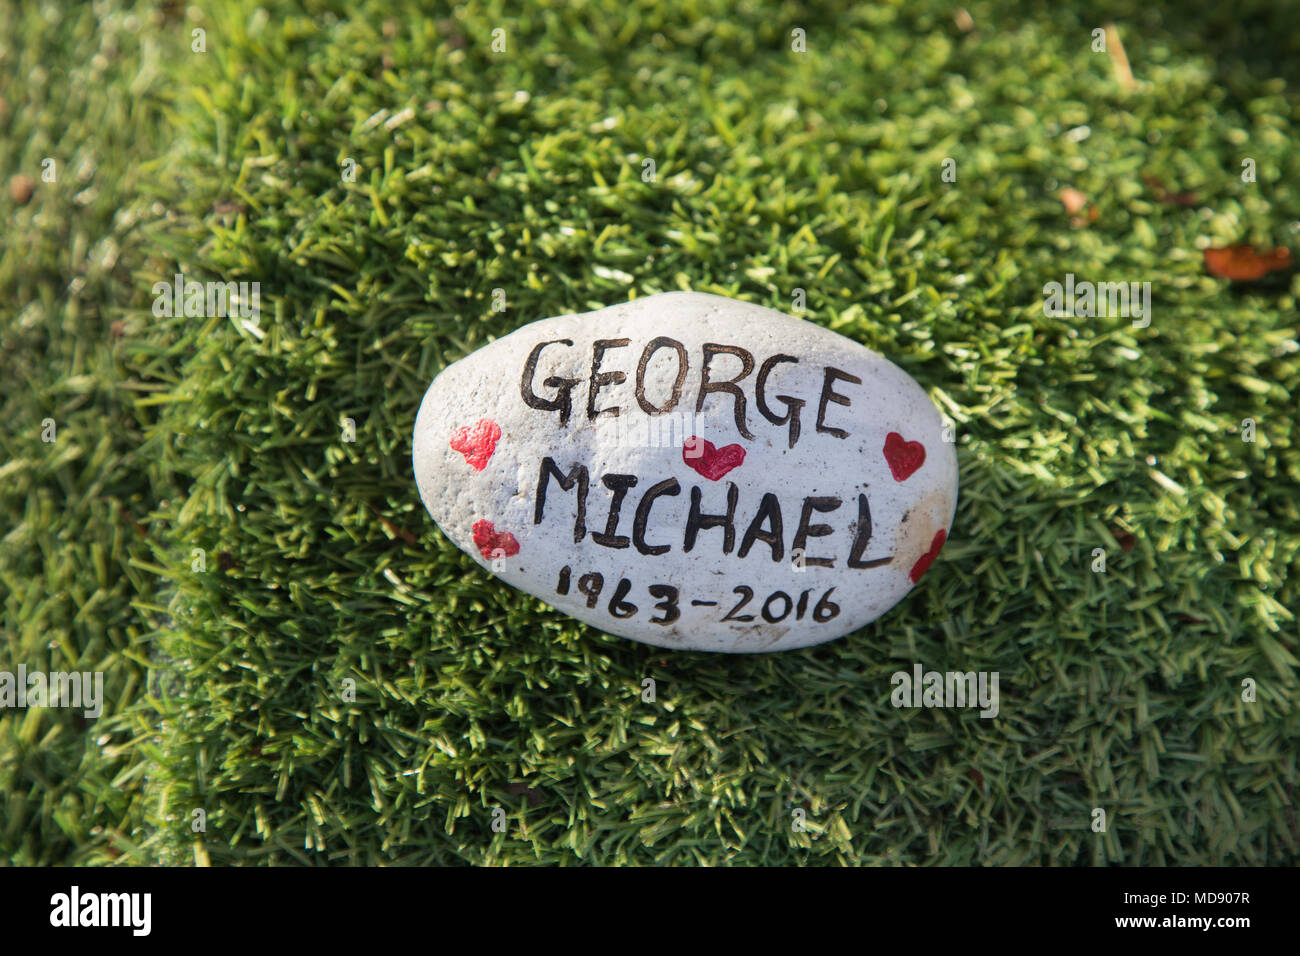 A pebble tribute left by a fan of pop star George Michael at a shrine or memorial to the late singer opposite his home in Highgate, north London Stock Photo